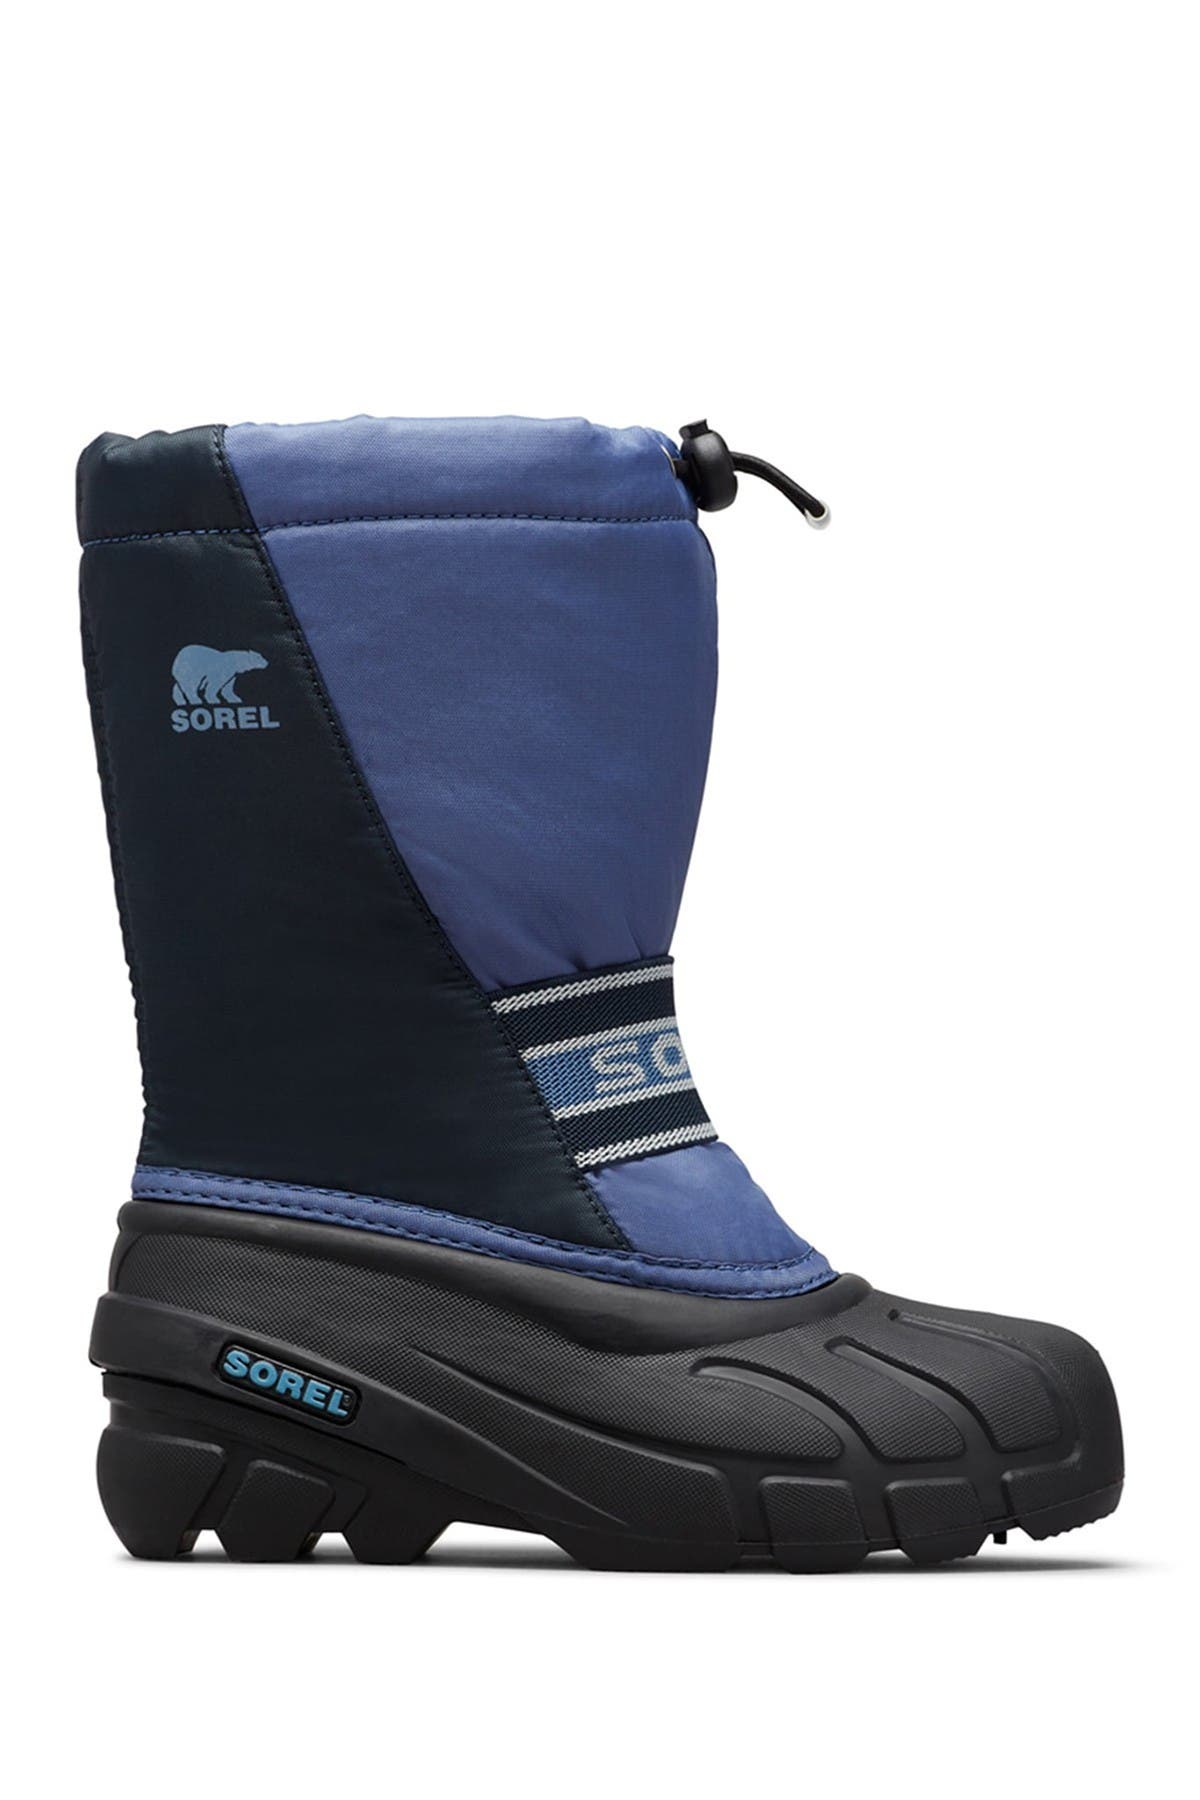 Sorel | Youth Cub Water Resistant Boot 